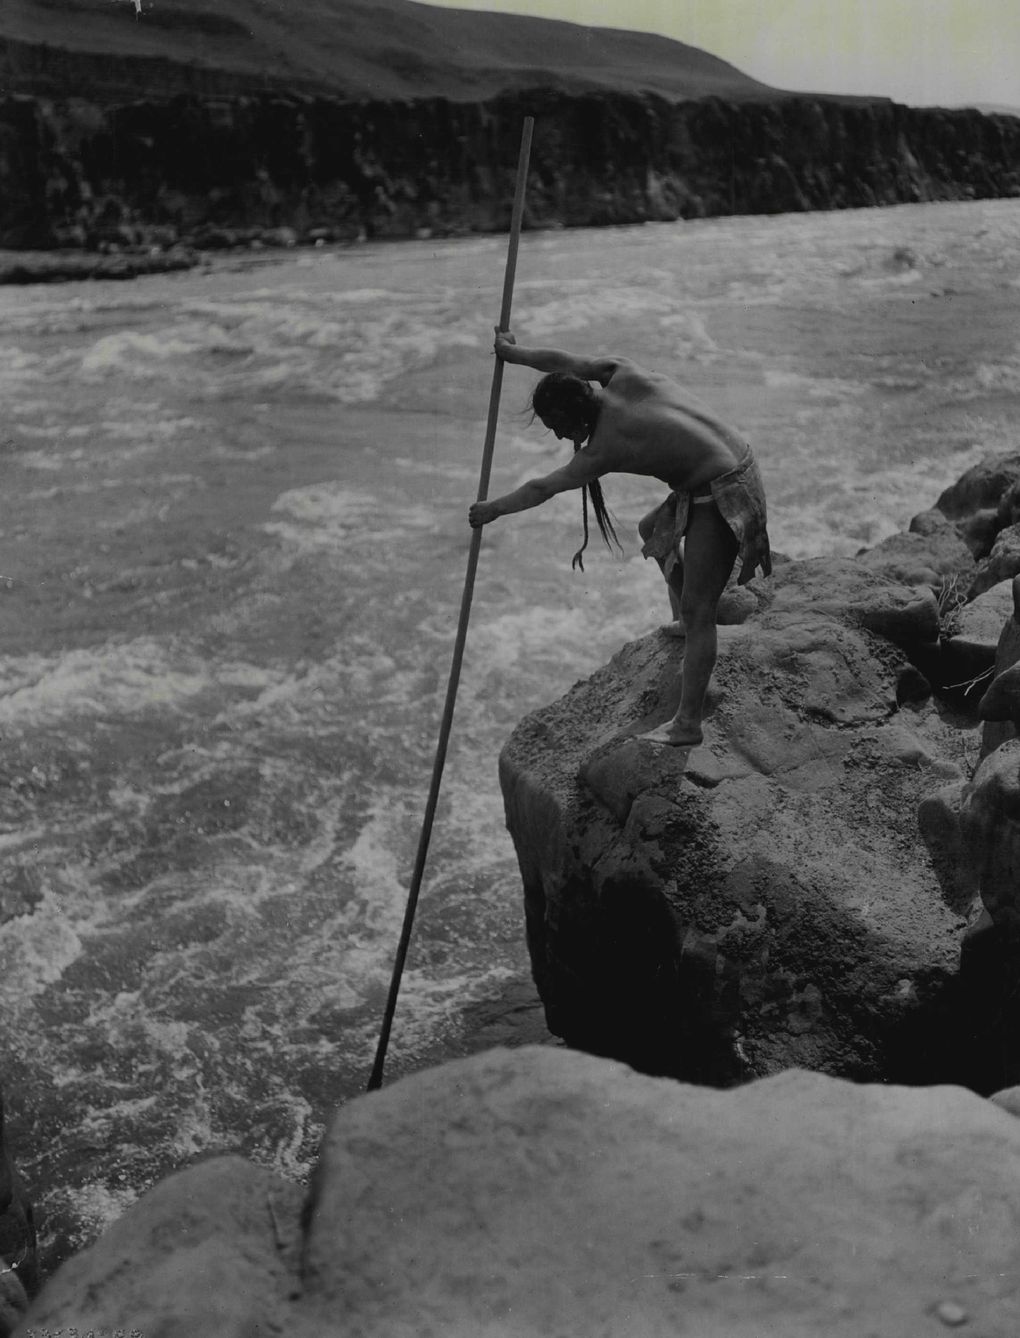 This 1909 picture of an Indian spearing fish on the Columbia River is a well-known Edward Curtis classic, titled “The Fisherman.” Celilo Falls was one of the greatest Indigenous fisheries in the world, and a center of Native trade, sustenance and culture for more than 10,000 years. The Dalles Dam flooded the falls in 1957. (Edward S. Curtis / The Seattle Times archive)